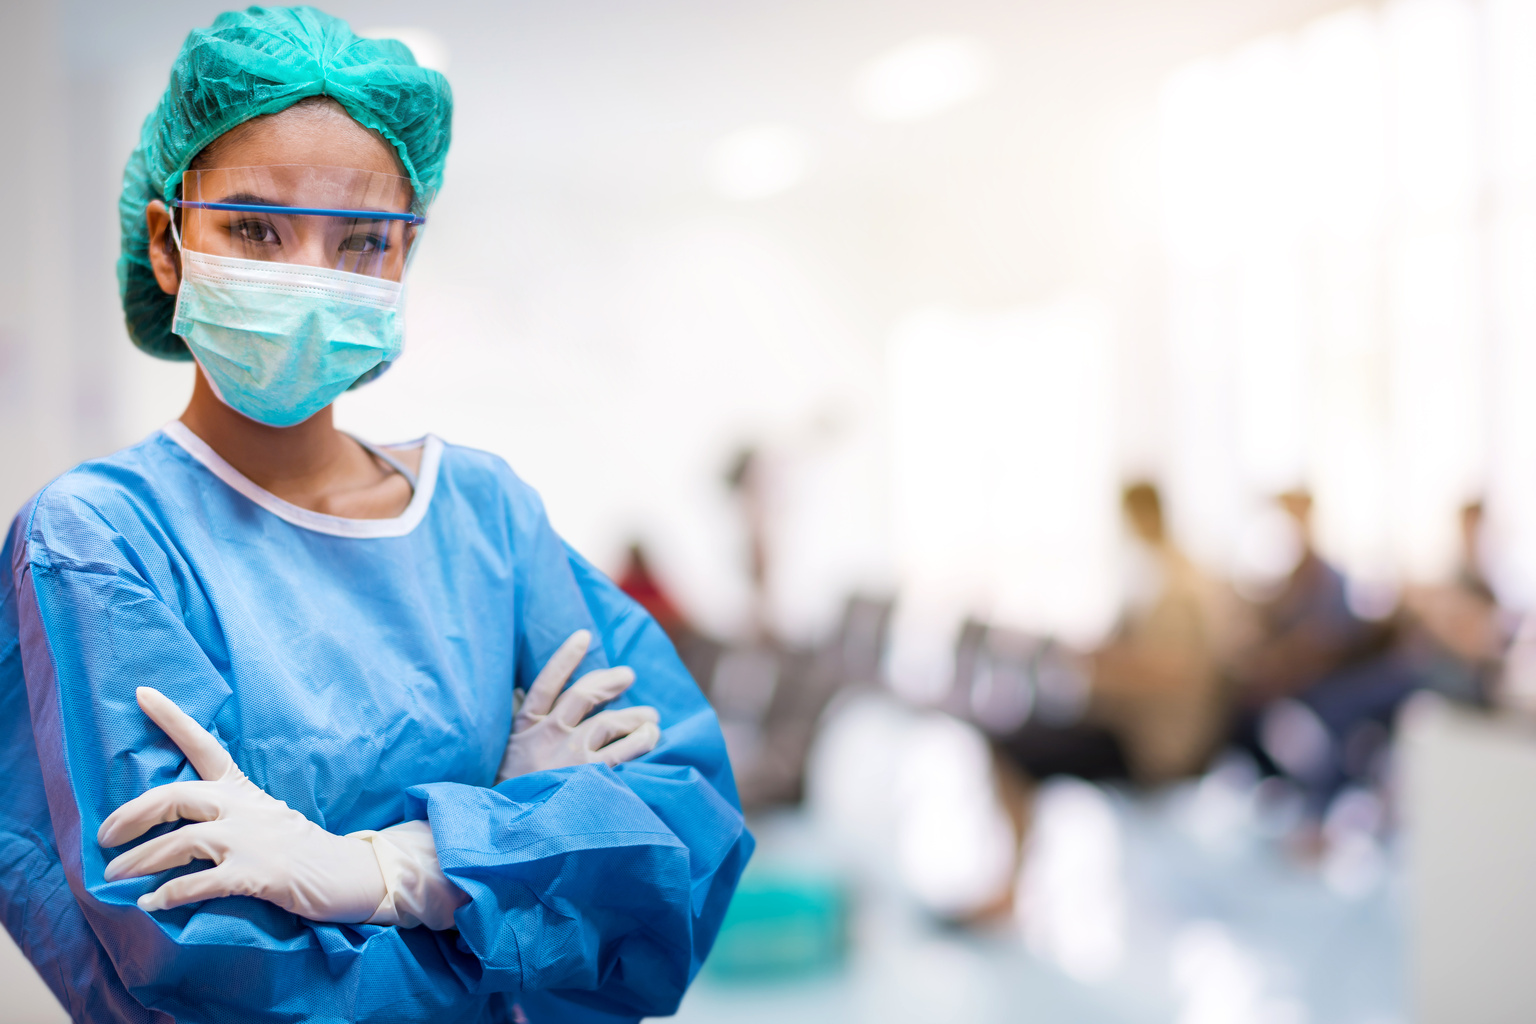 Confident medical professional woman in scrubs and COVID-19 mask